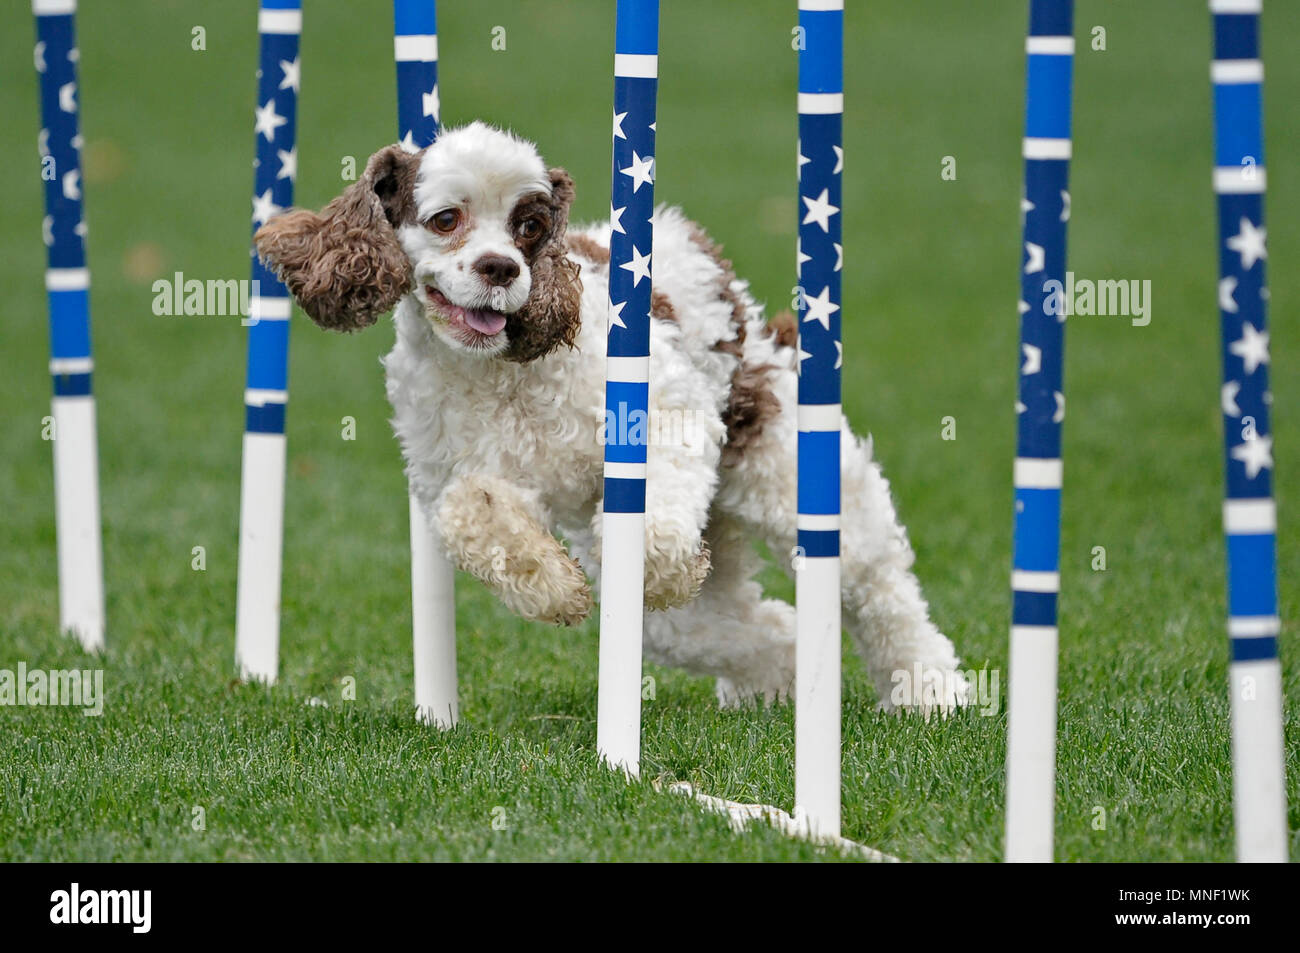 An American Cocker Spaniel weaving thru stars and stripes weave poles in an AKC agility trial. Stock Photo